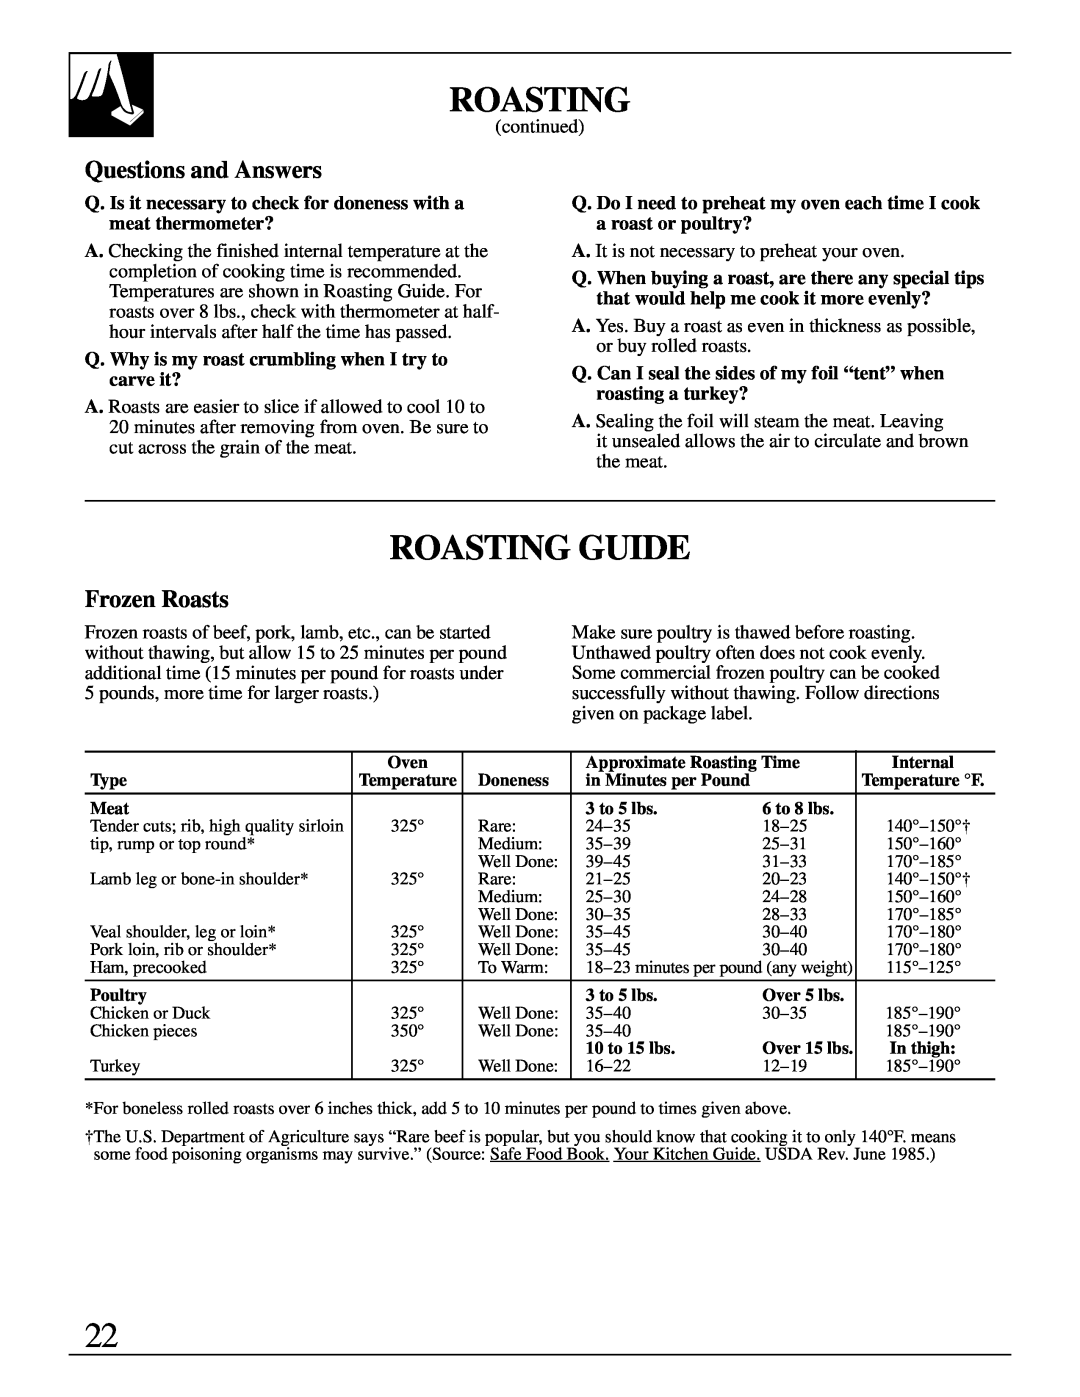 Hotpoint RGB744 installation instructions Roasting Guide, Frozen Roasts, Questions and Answers 